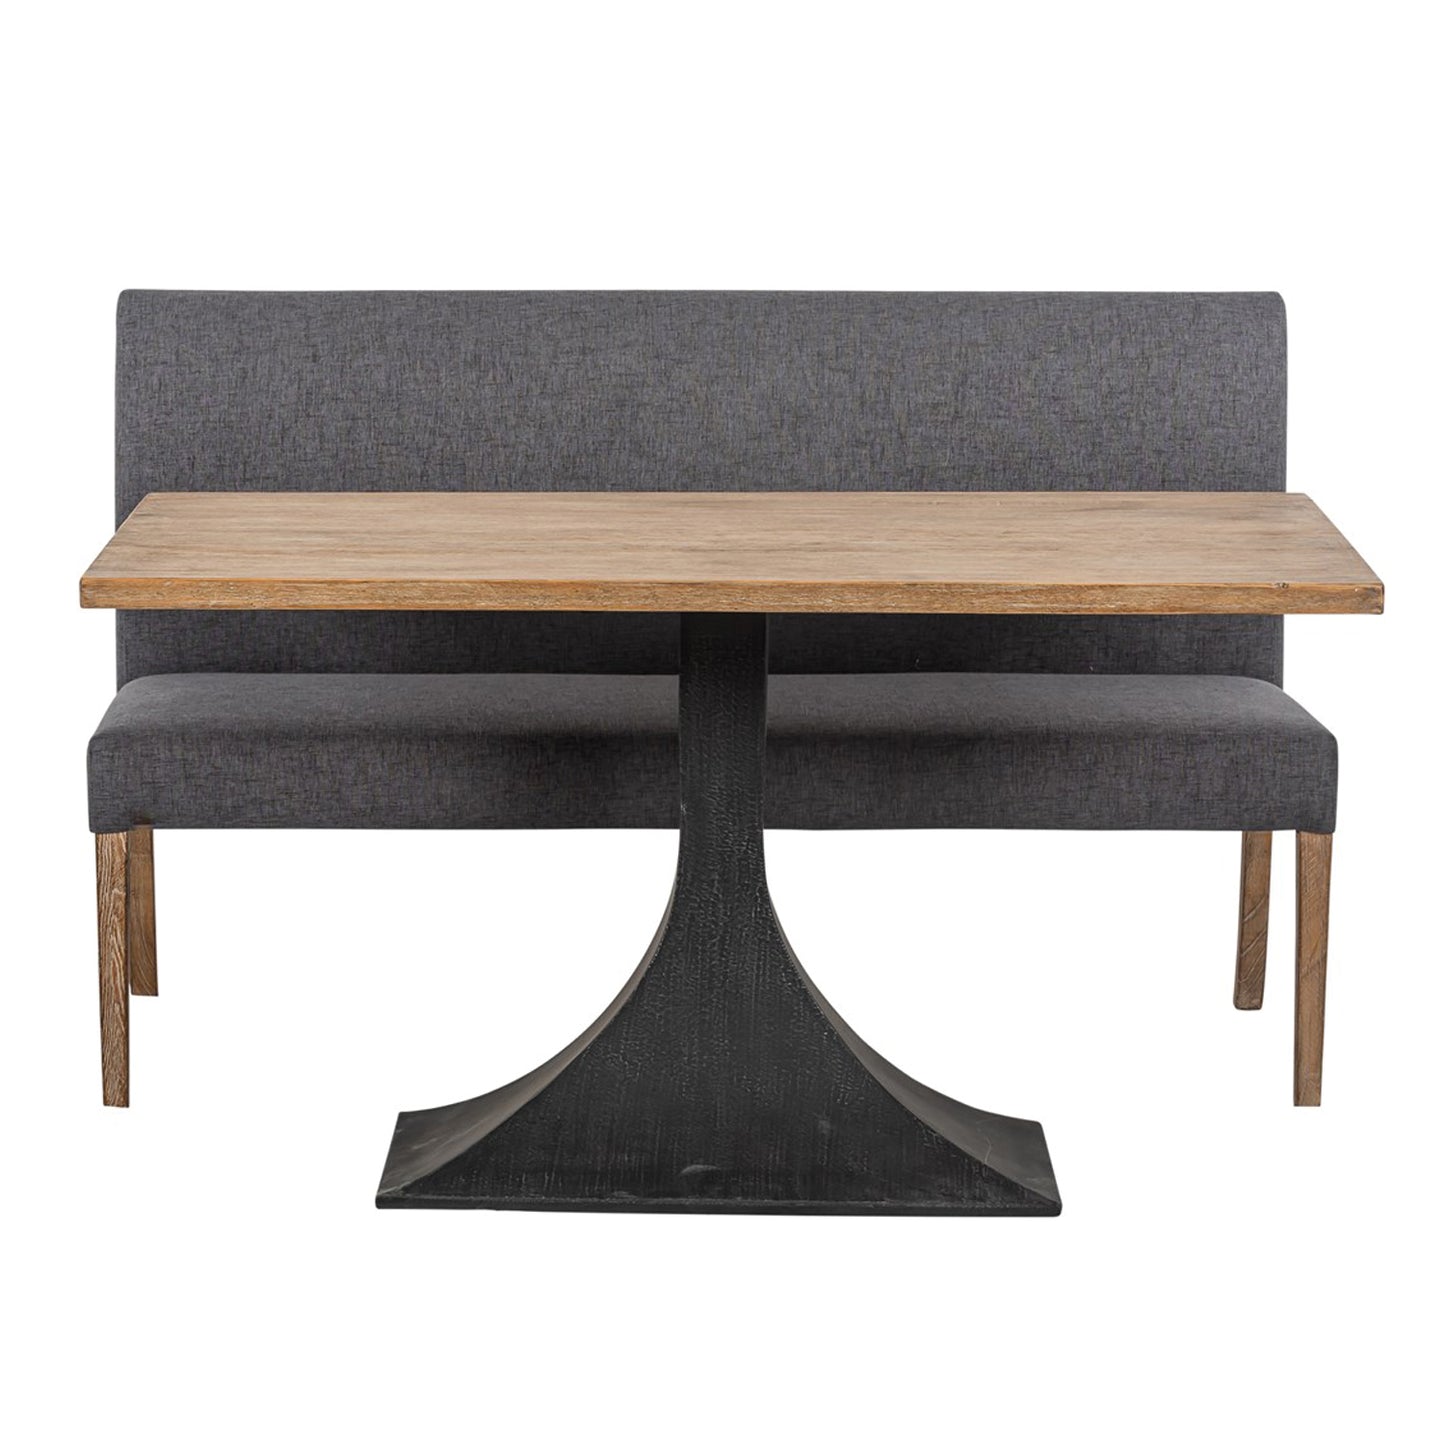 Eastwood Dining Bench - 150cm